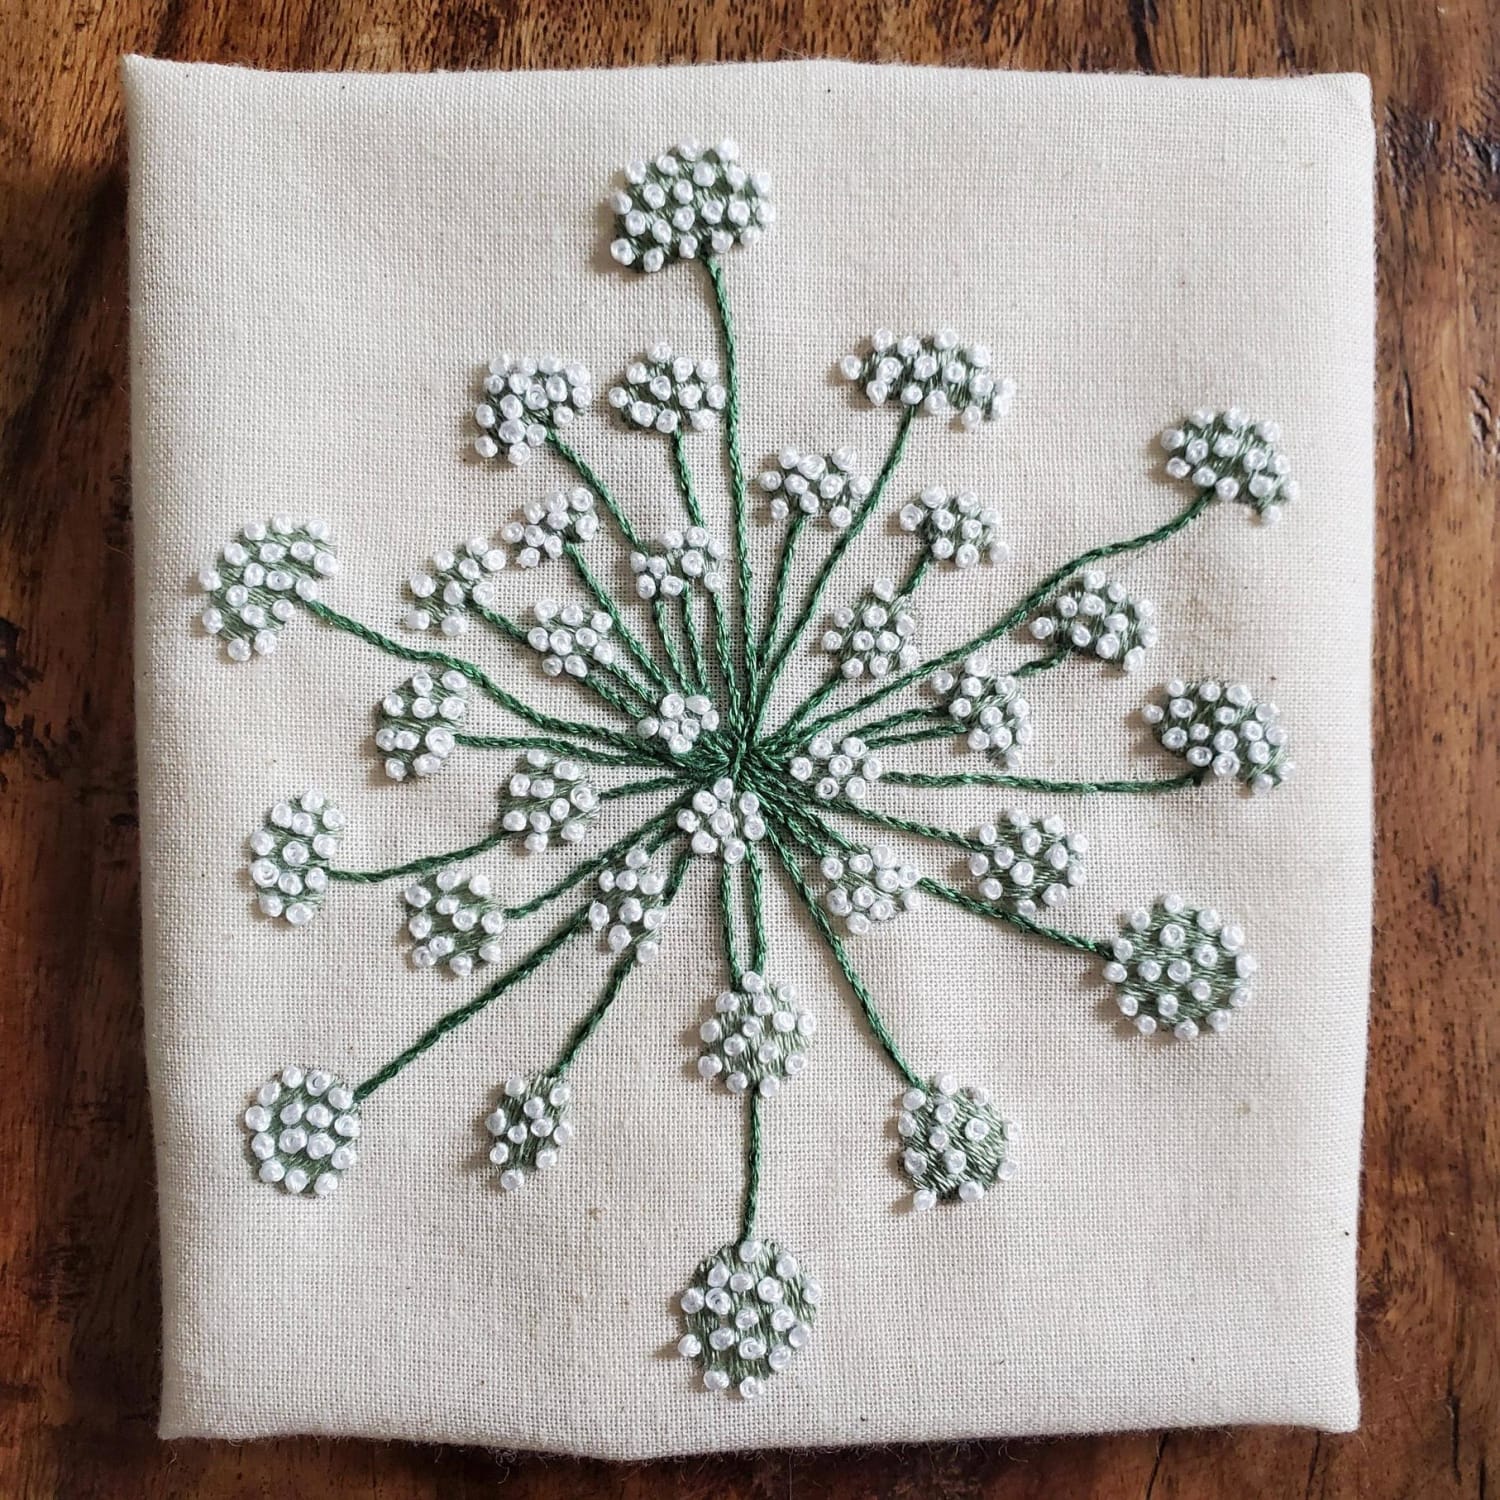 Gift for my mom based on wildflowers she photographed on our trip together (part 2 of 3)